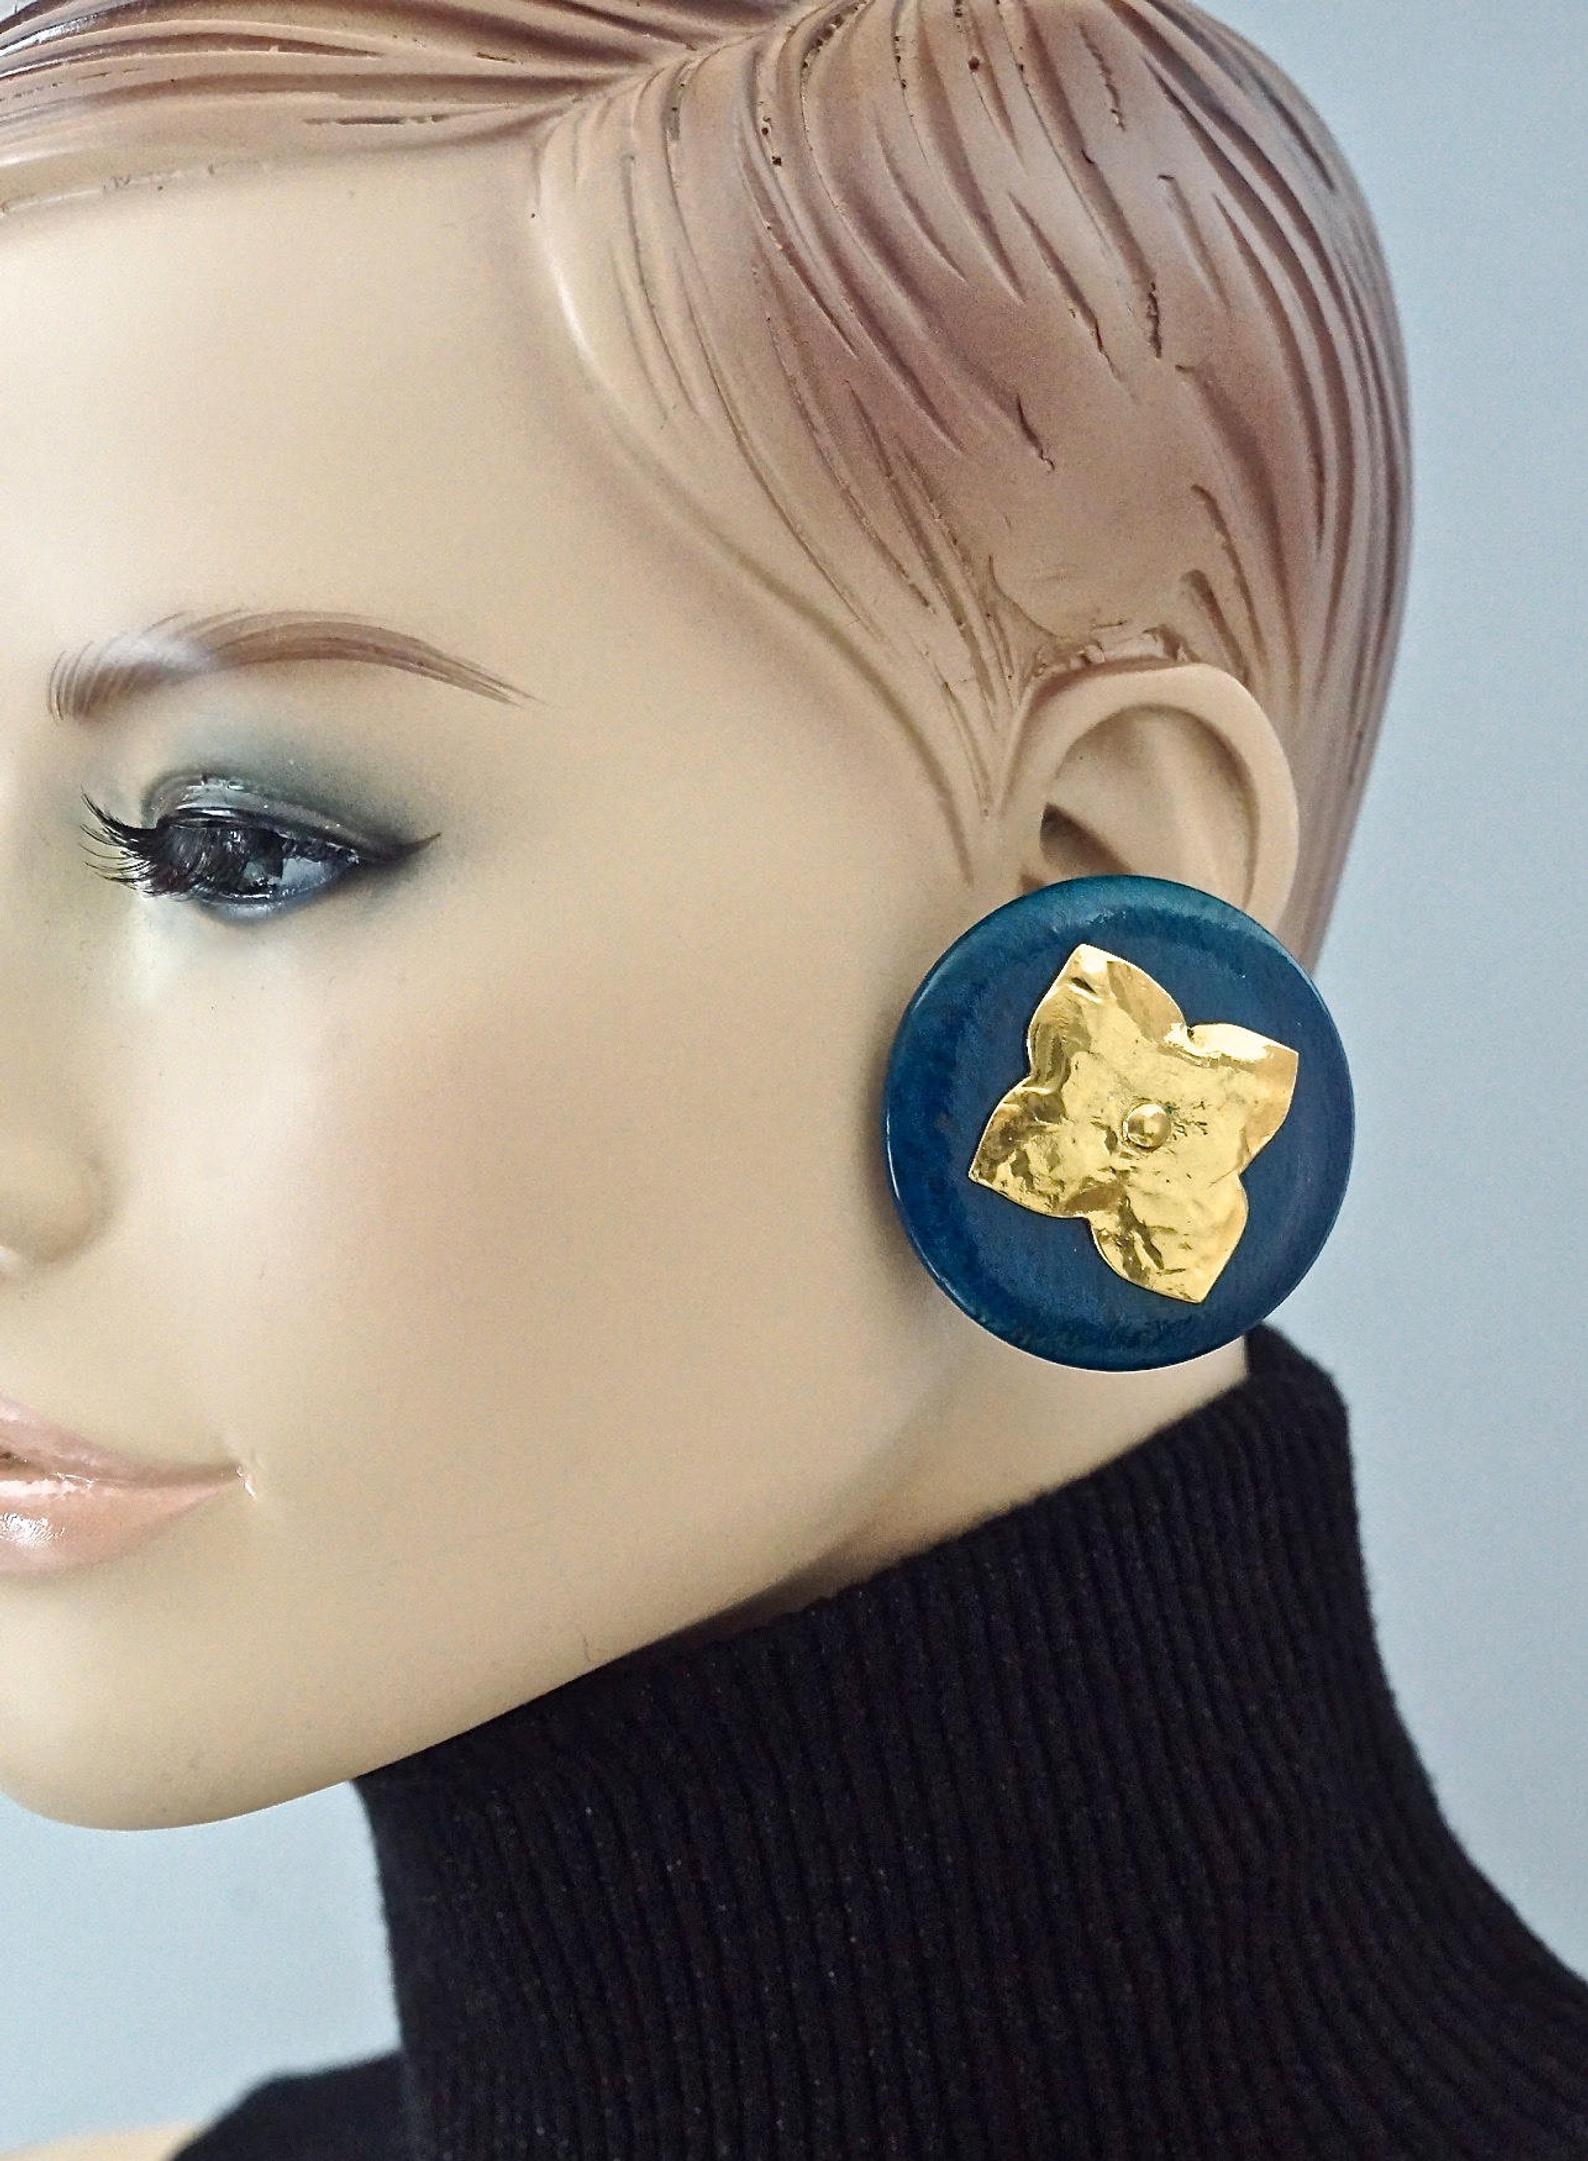 Vintage YVES SAINT LAURENT Ysl Blue Wood Textured Gilt Flower Earrings

Measurements:
Height: 1.96 inches (5 cm)
Width: 1.96 inches (5 cm)
Weight: 24 grams

Features:
- 100% Authentic YVES SAINT LAURENT.
- Blue wood with textured gilt flower